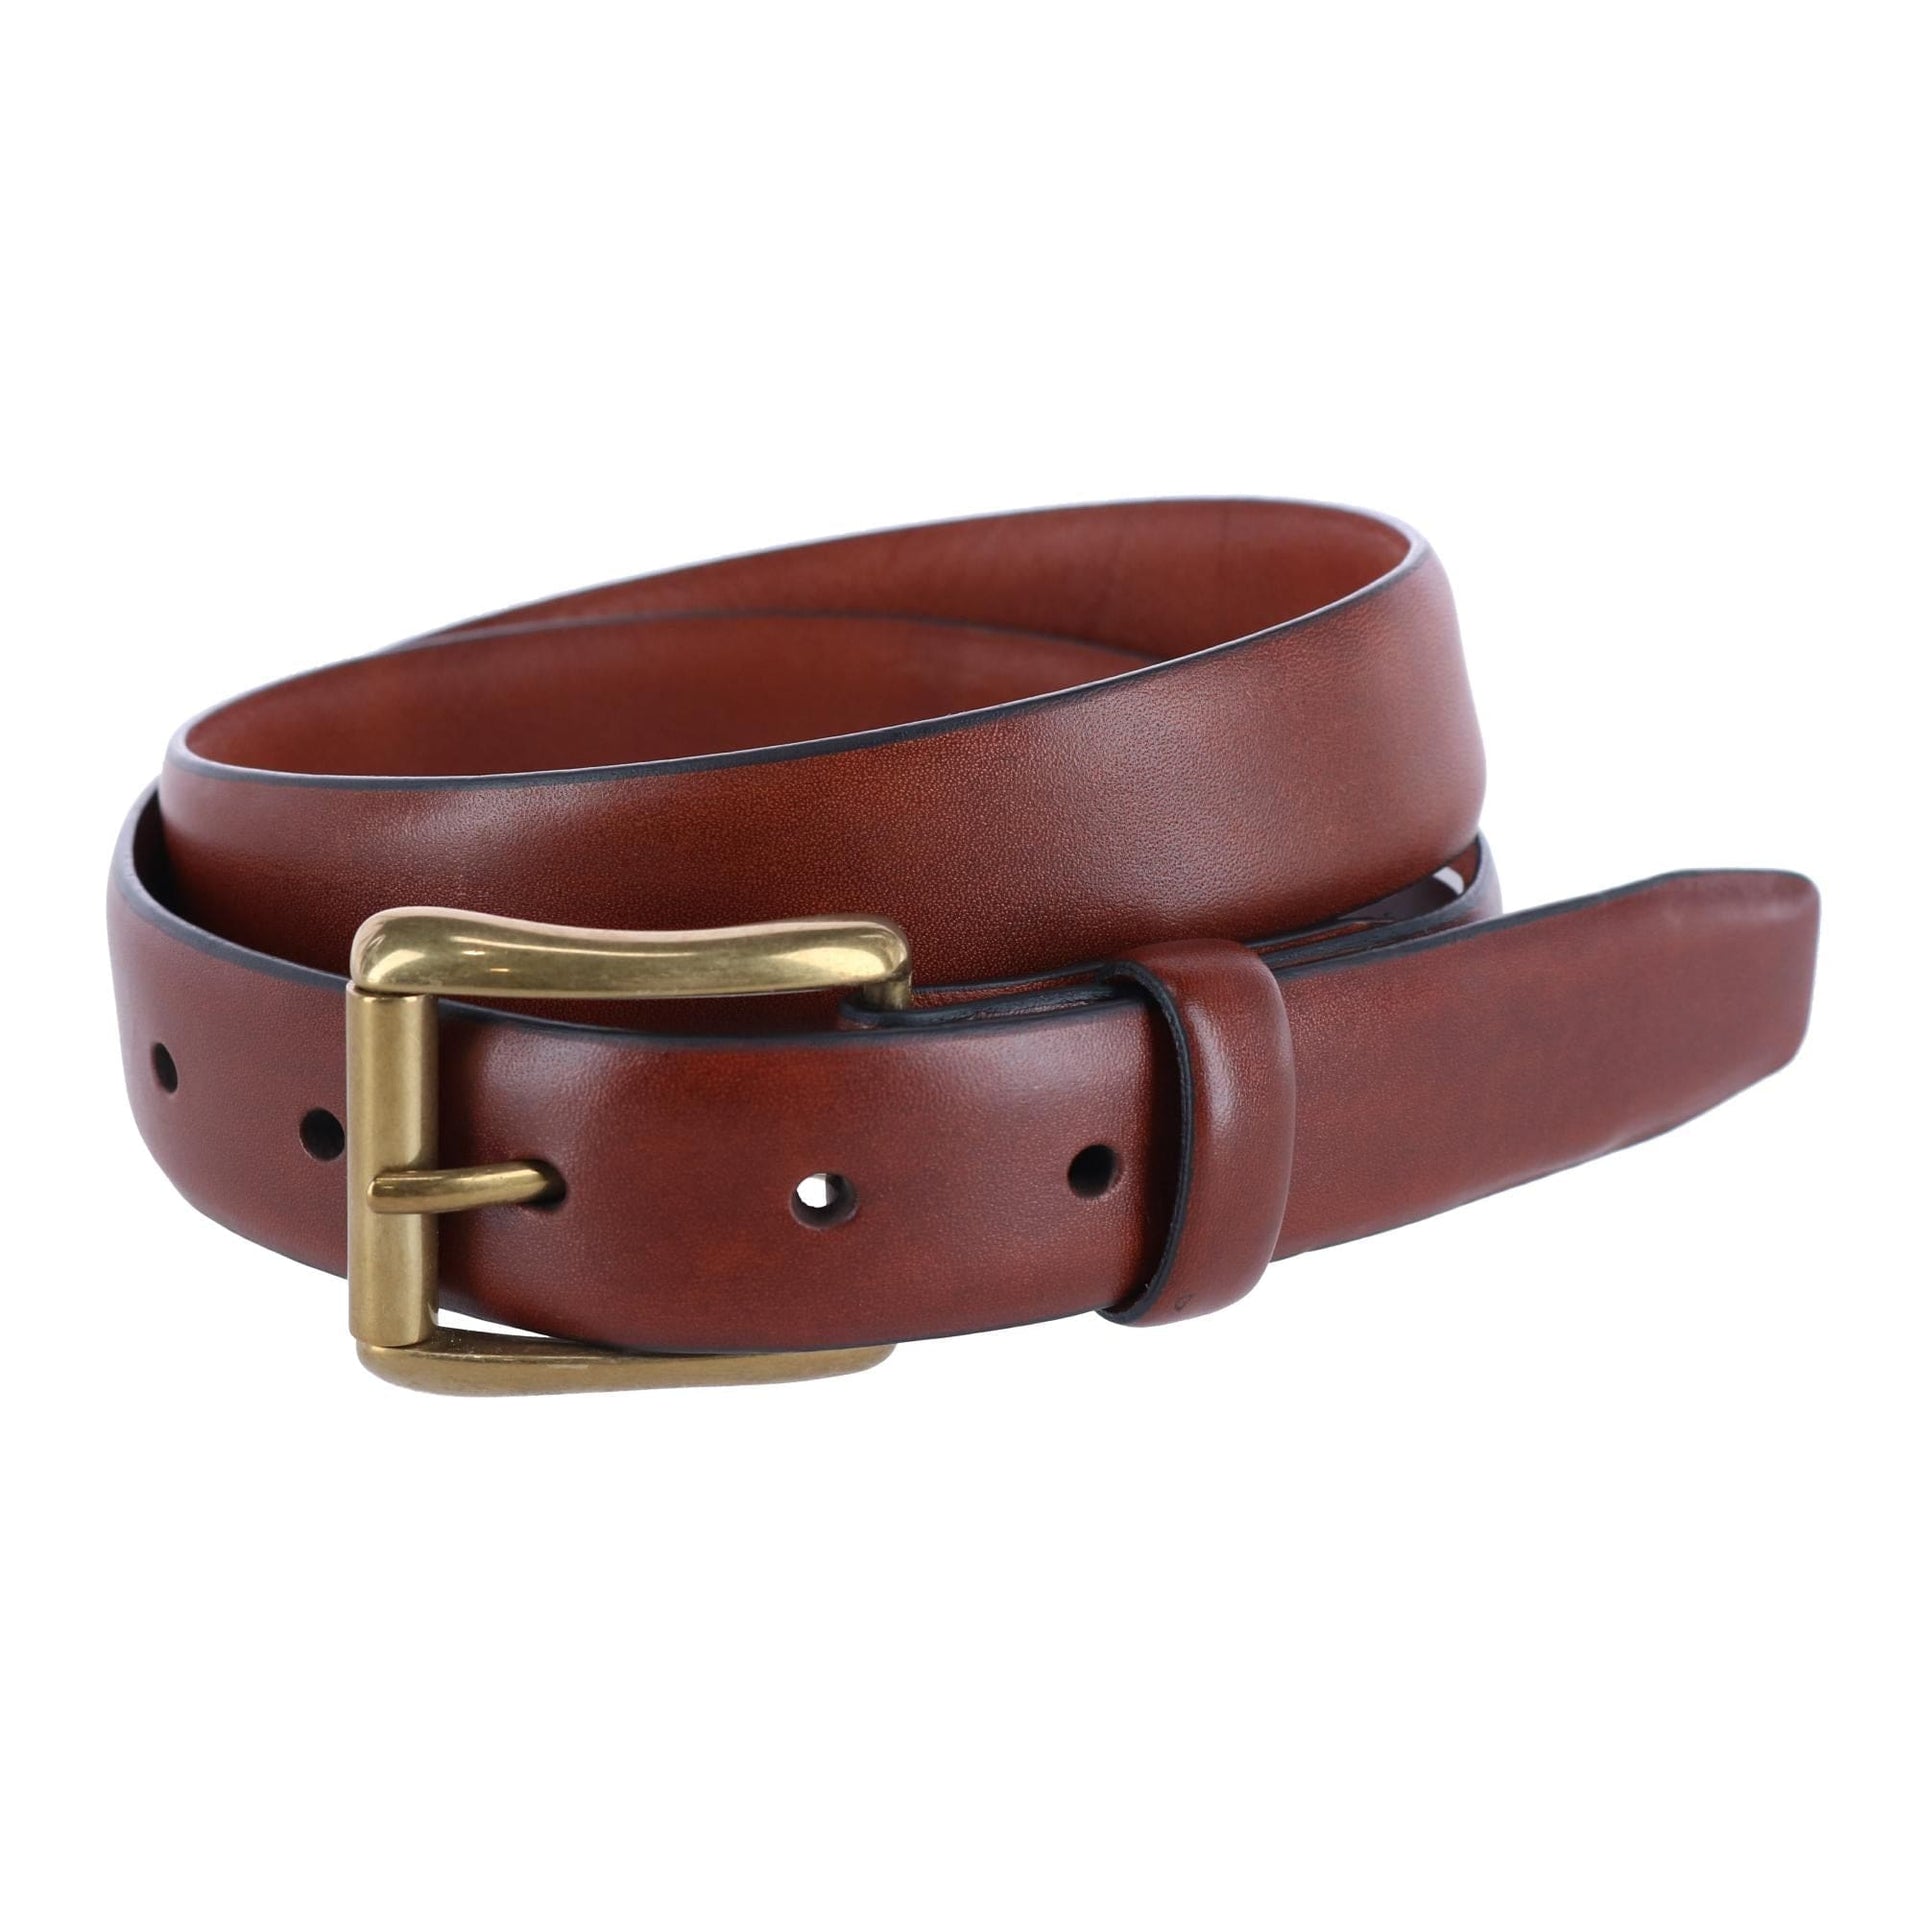 30mm Cortina Leather Belt with Solid Brass Roller Buckle